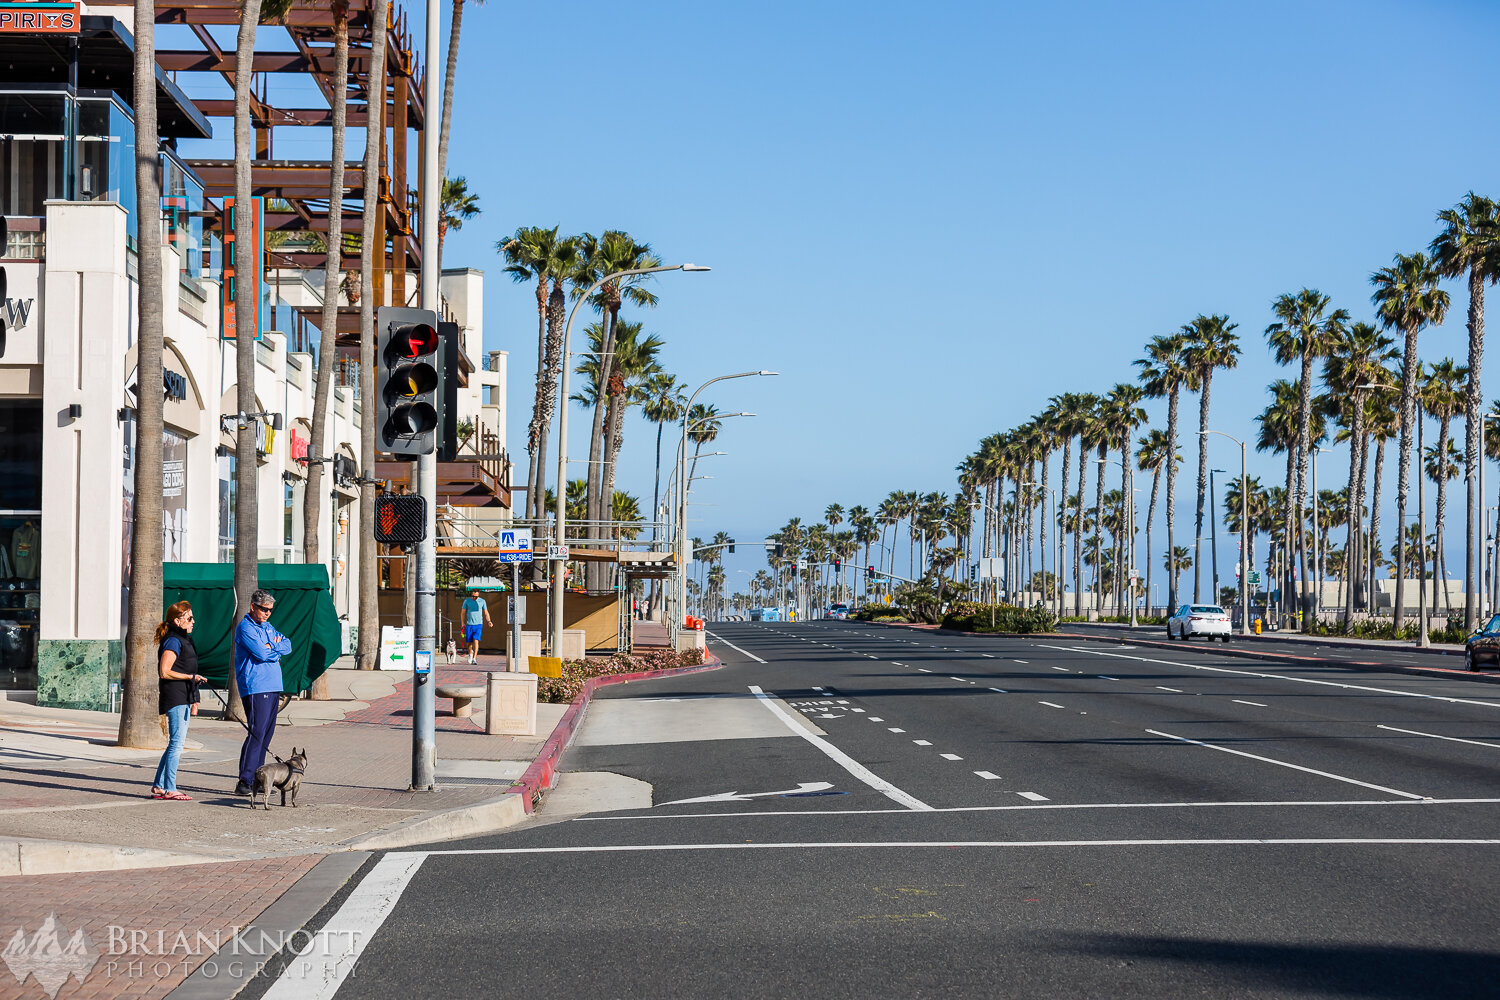 PCH and Main Street in Huntington Beach. What would normally be congested with cars and people are now nearly empty.